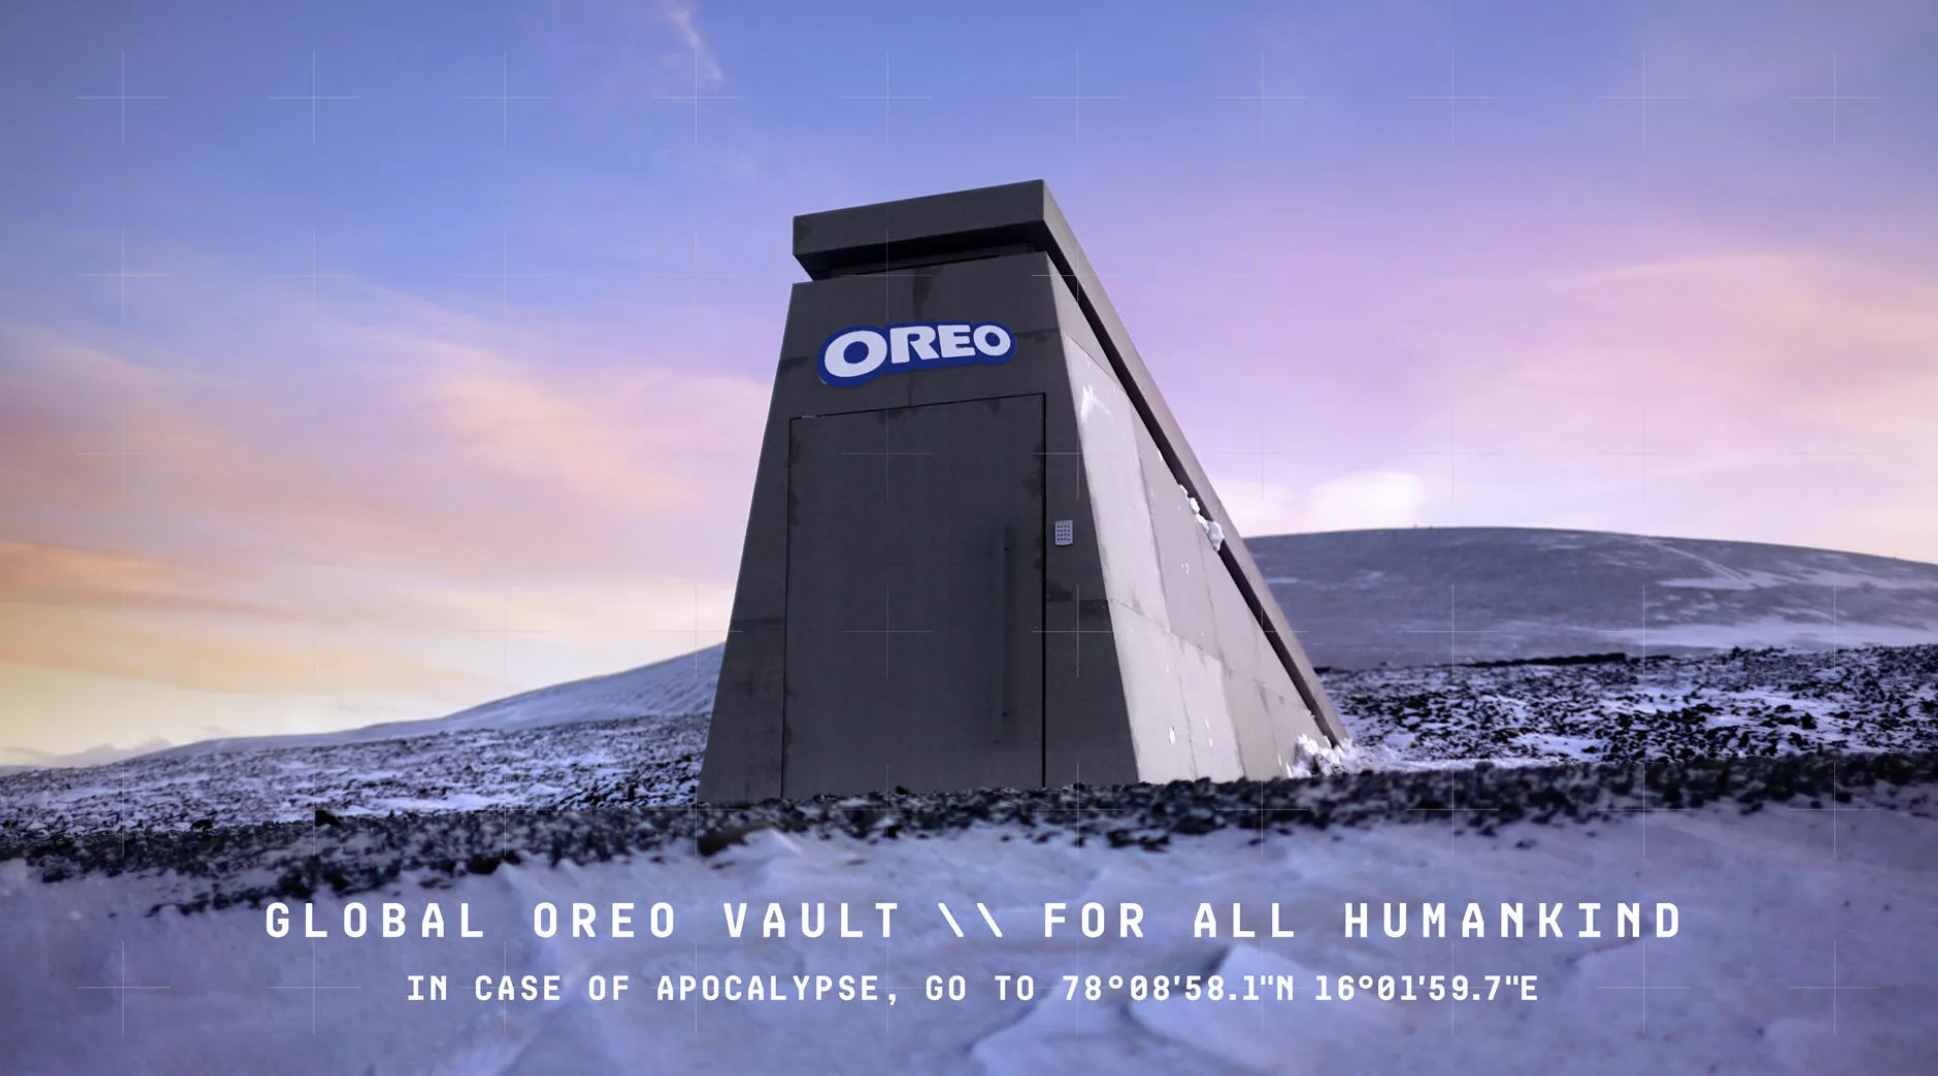 Global Oreo Vault. Image courtesy Oreo. All rights reserved.